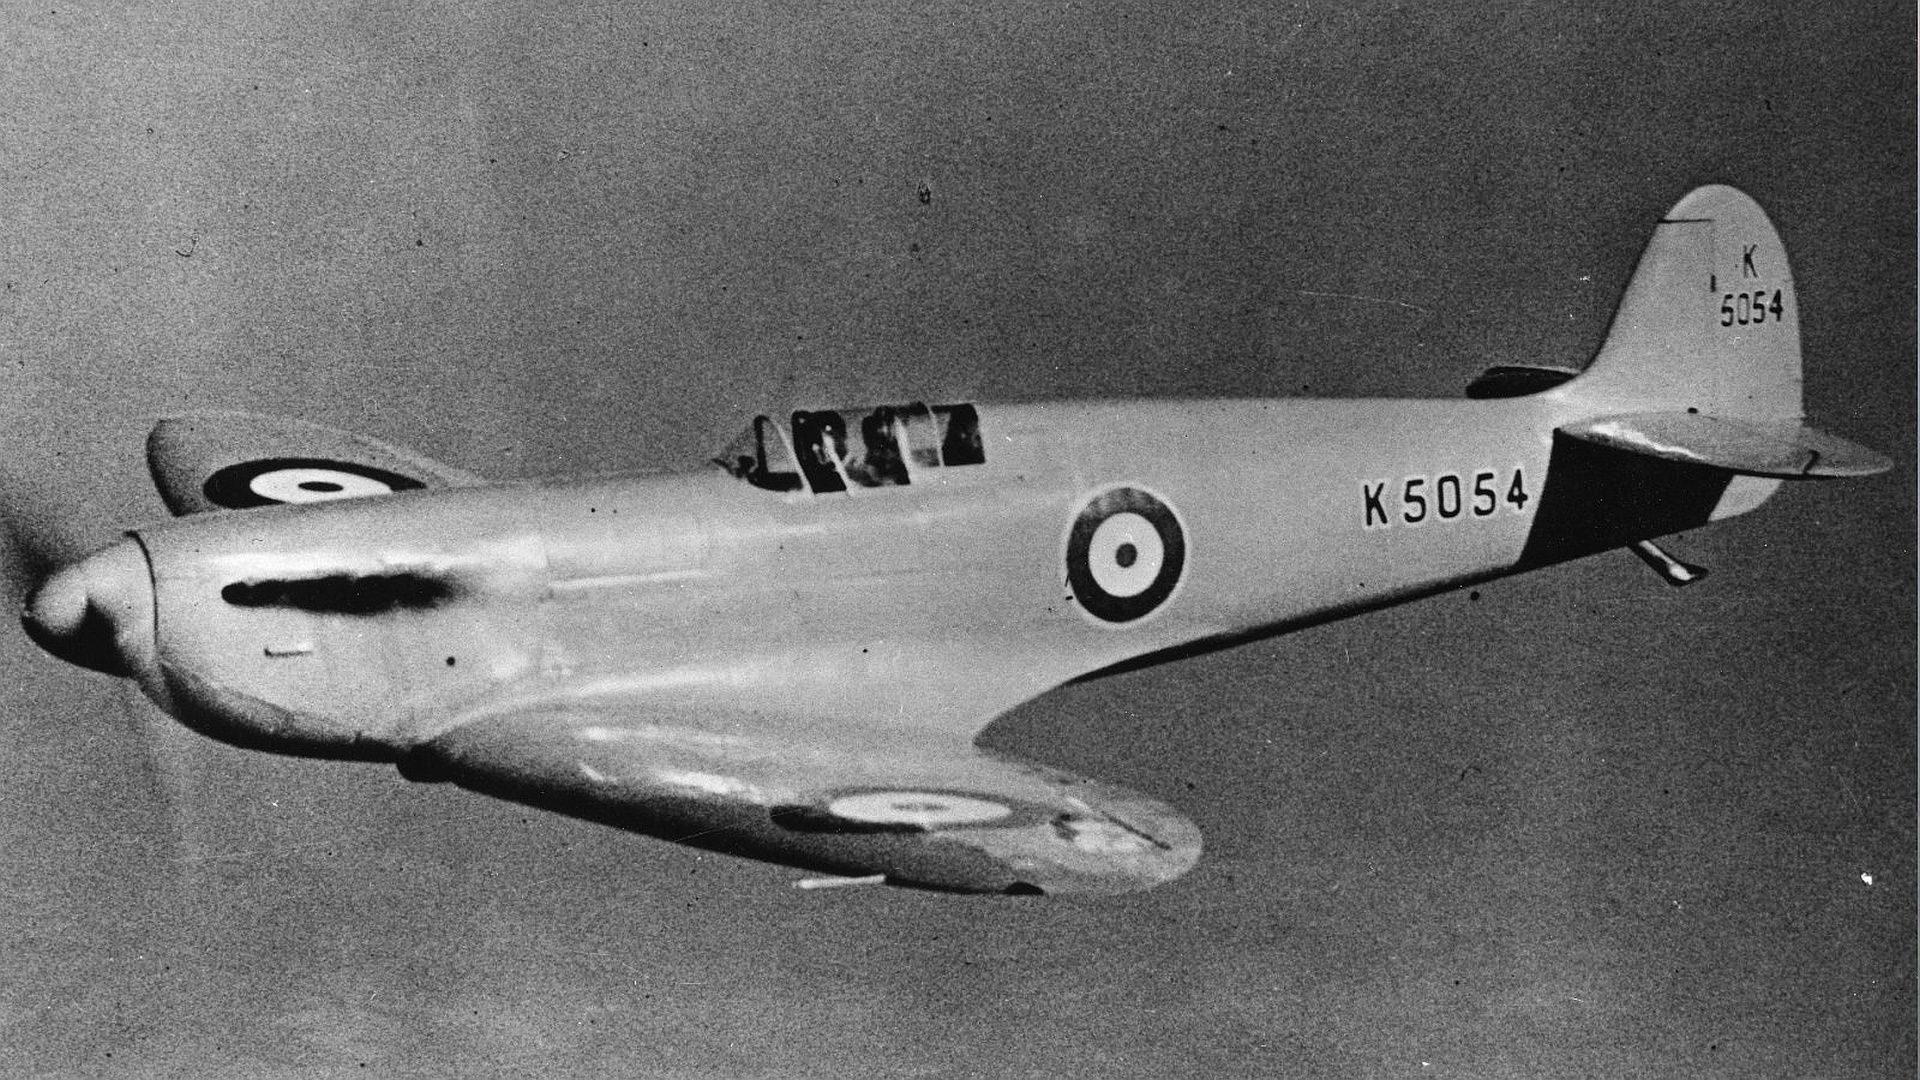 Spitfire Prototype K5054 First Flight 5th March 1936